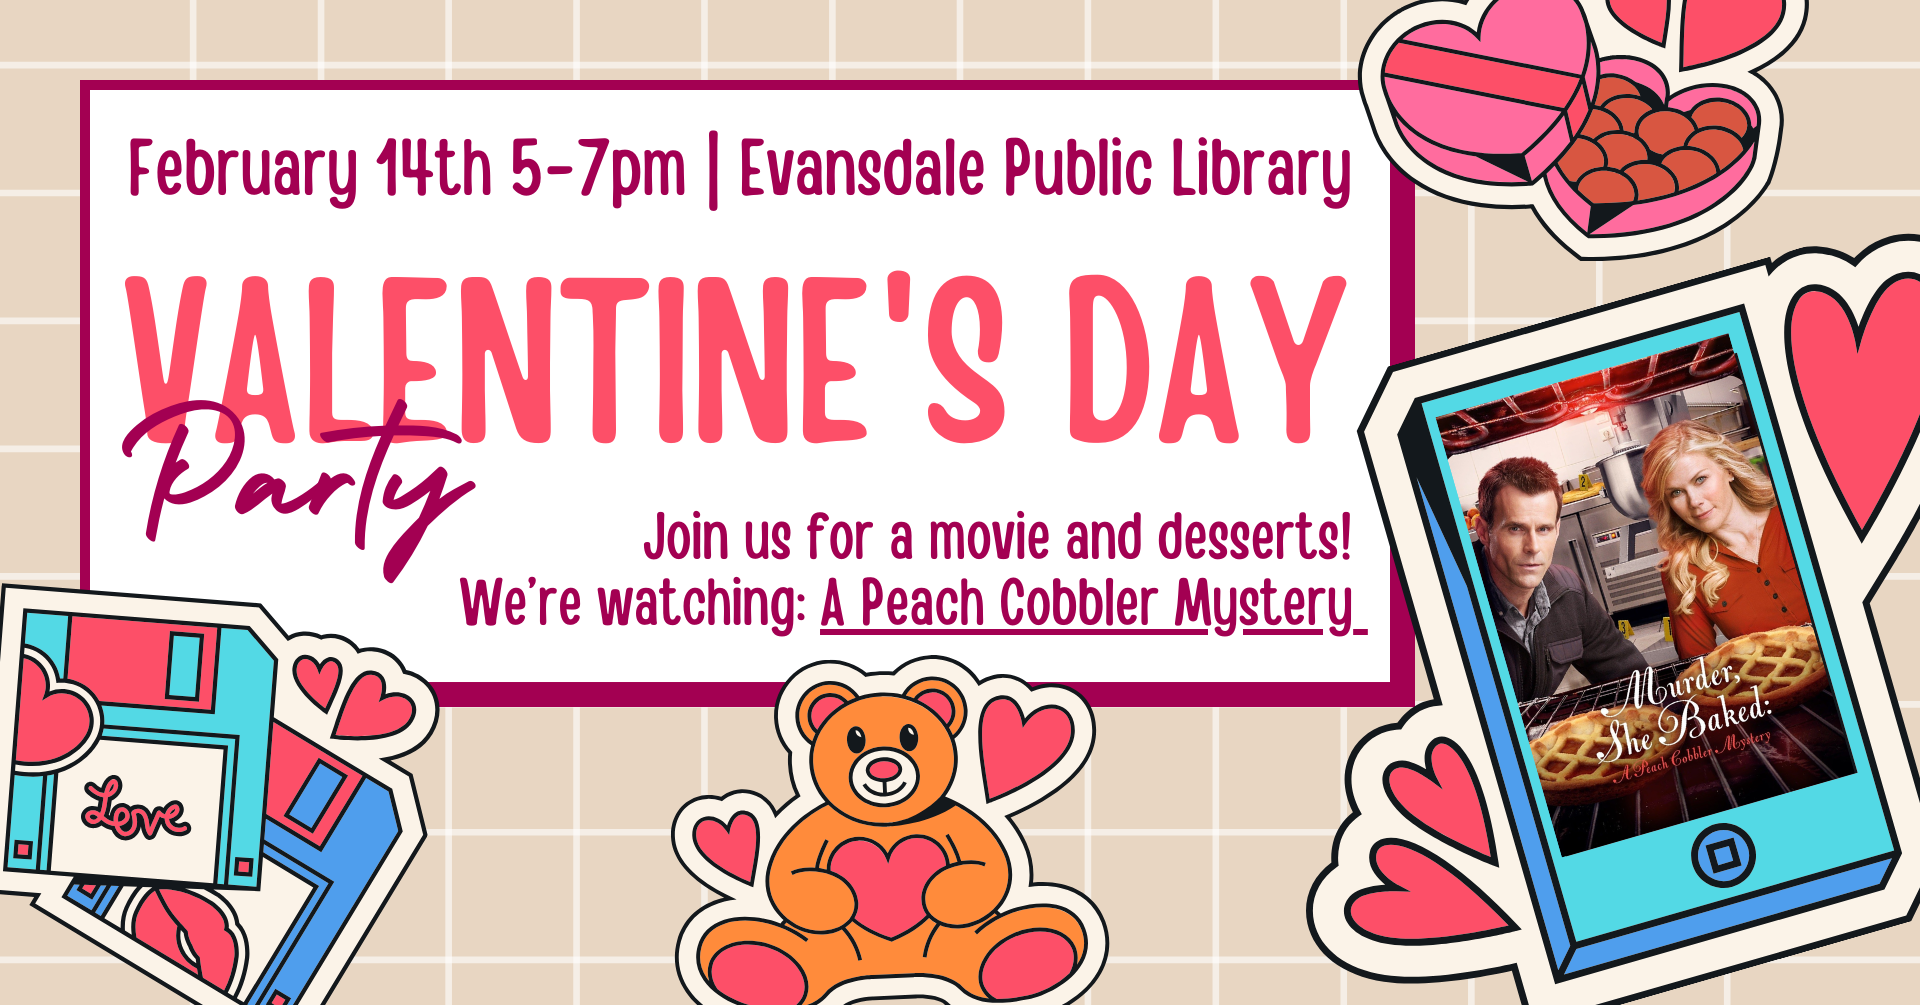 February 14th 5-7pm | Evansdale Public Library. Valentine's Day Party. Join us for a movie and desserts! We're watching "A Peach Cobbler Mystery."